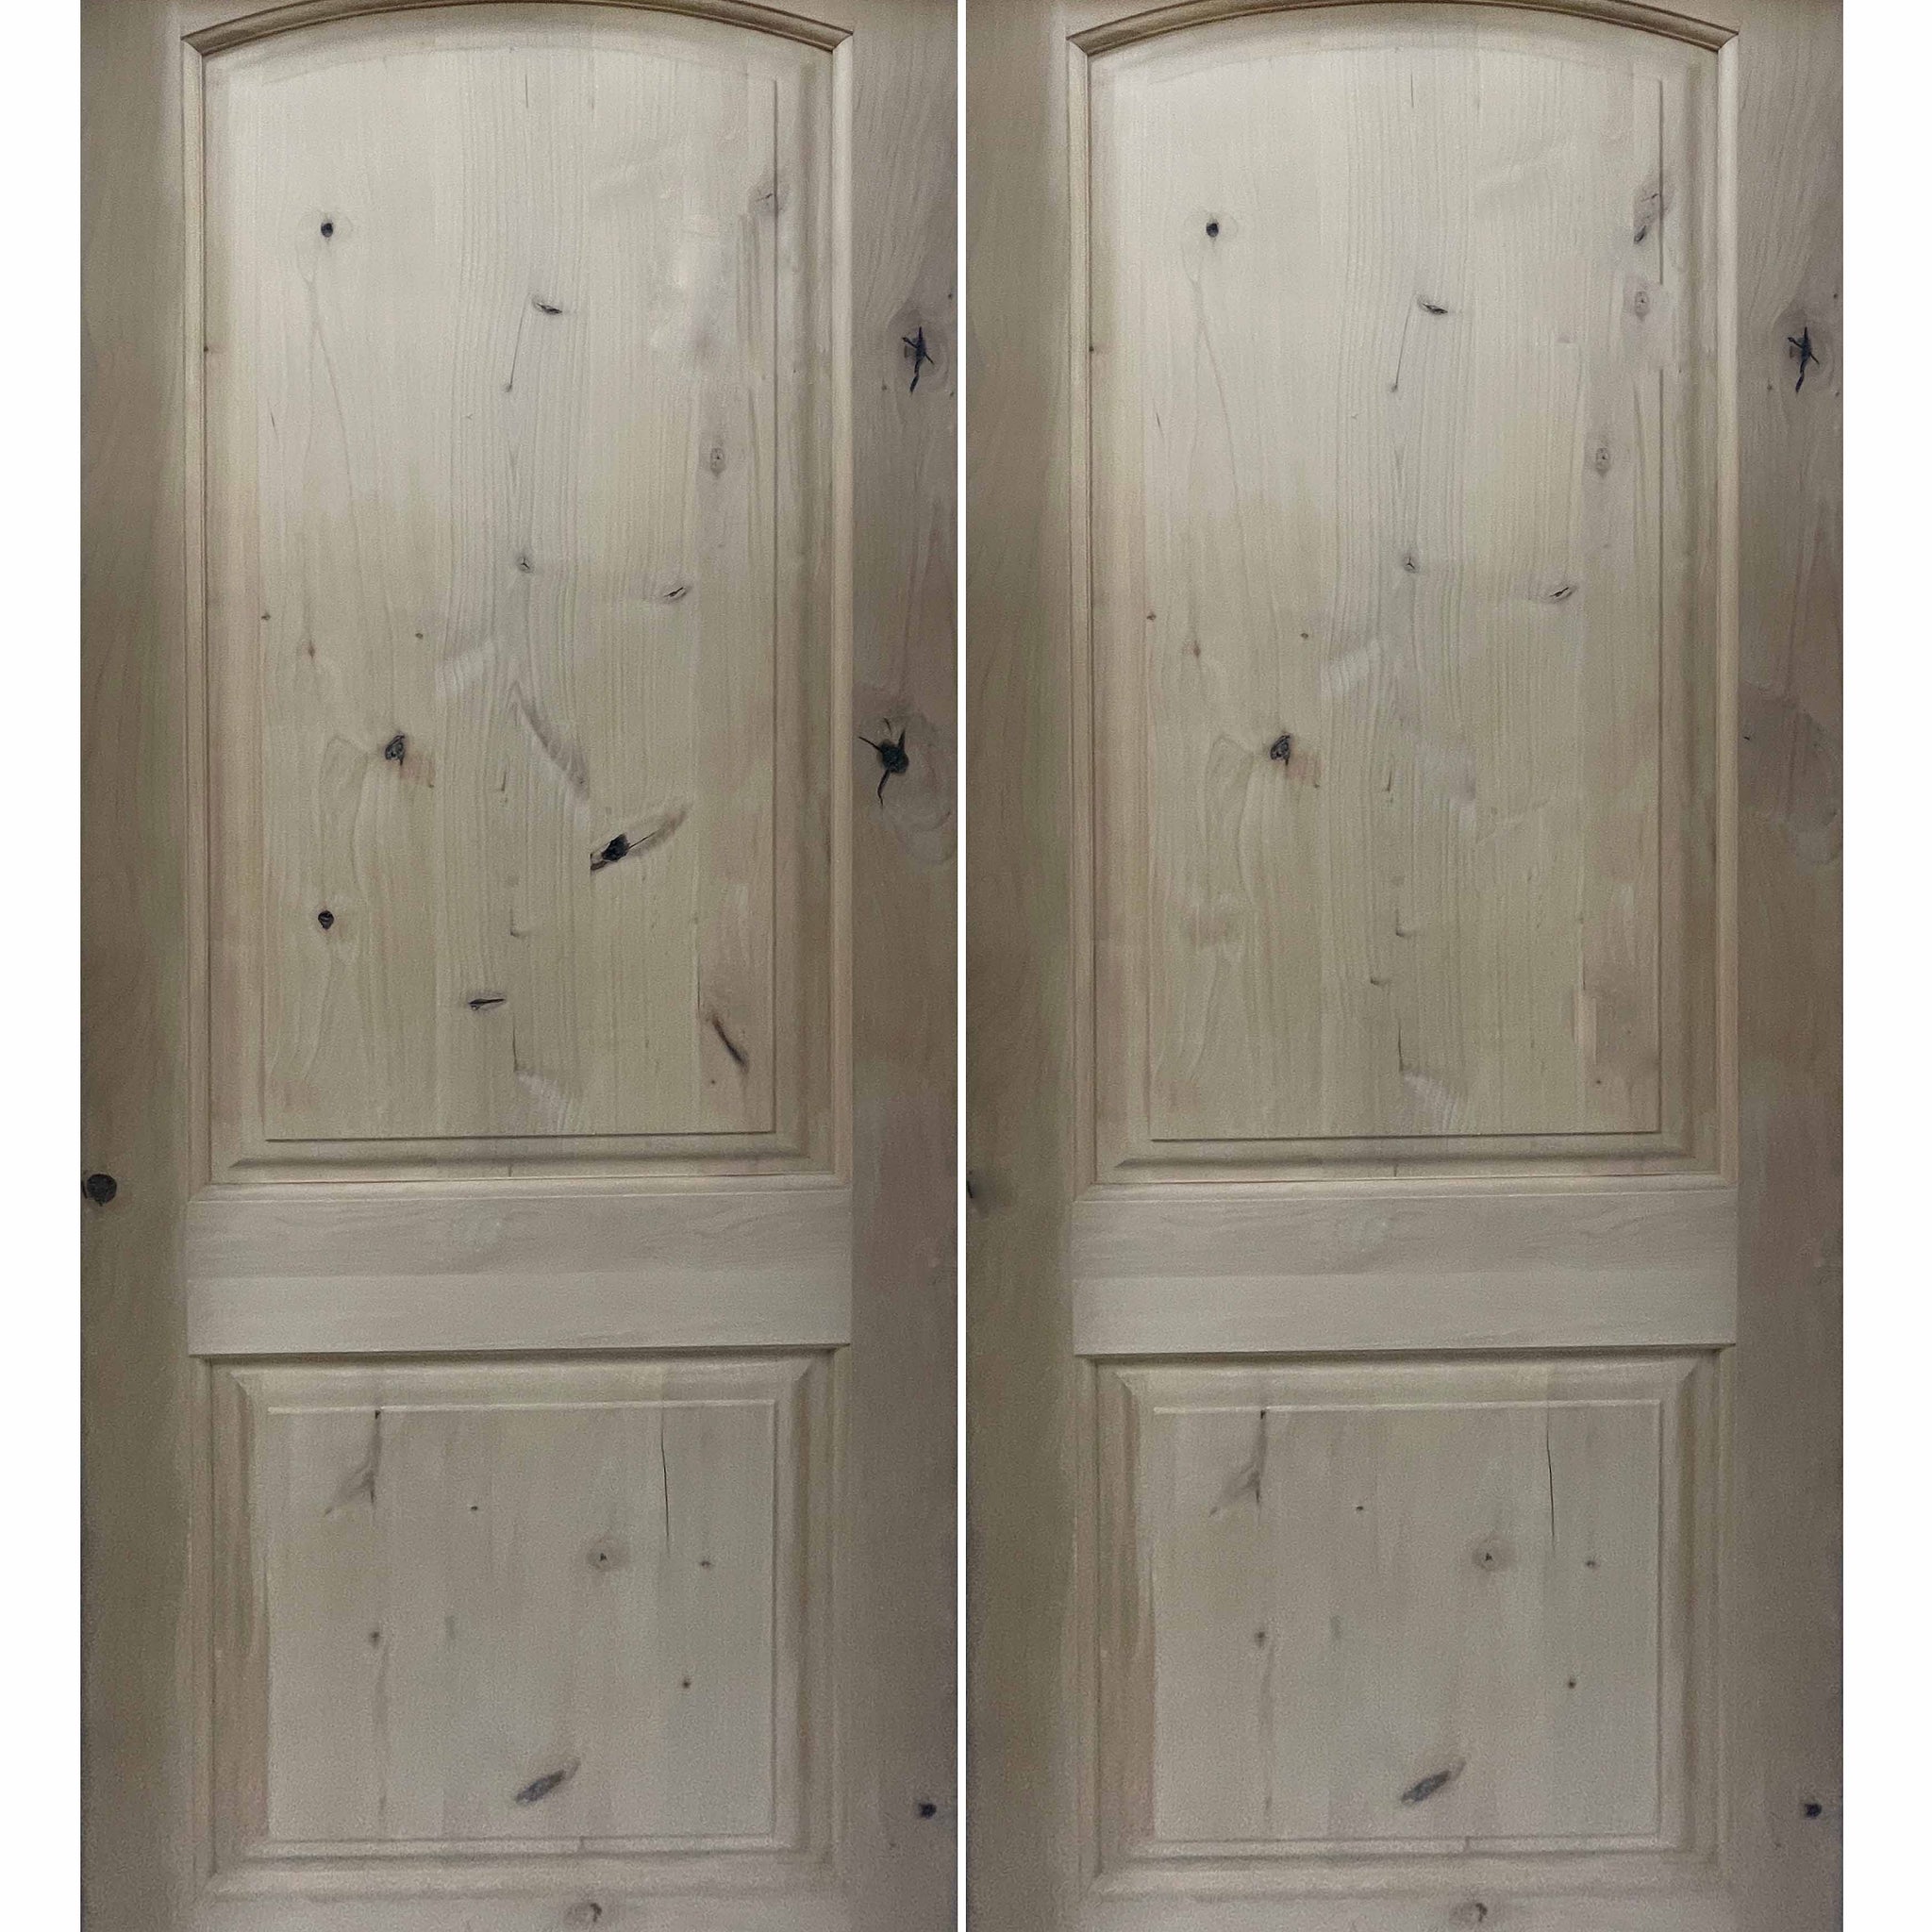 6 ft. x 8 ft. Pre-Hung Double Exterior Knotty Alder 2 Panel Arched Door